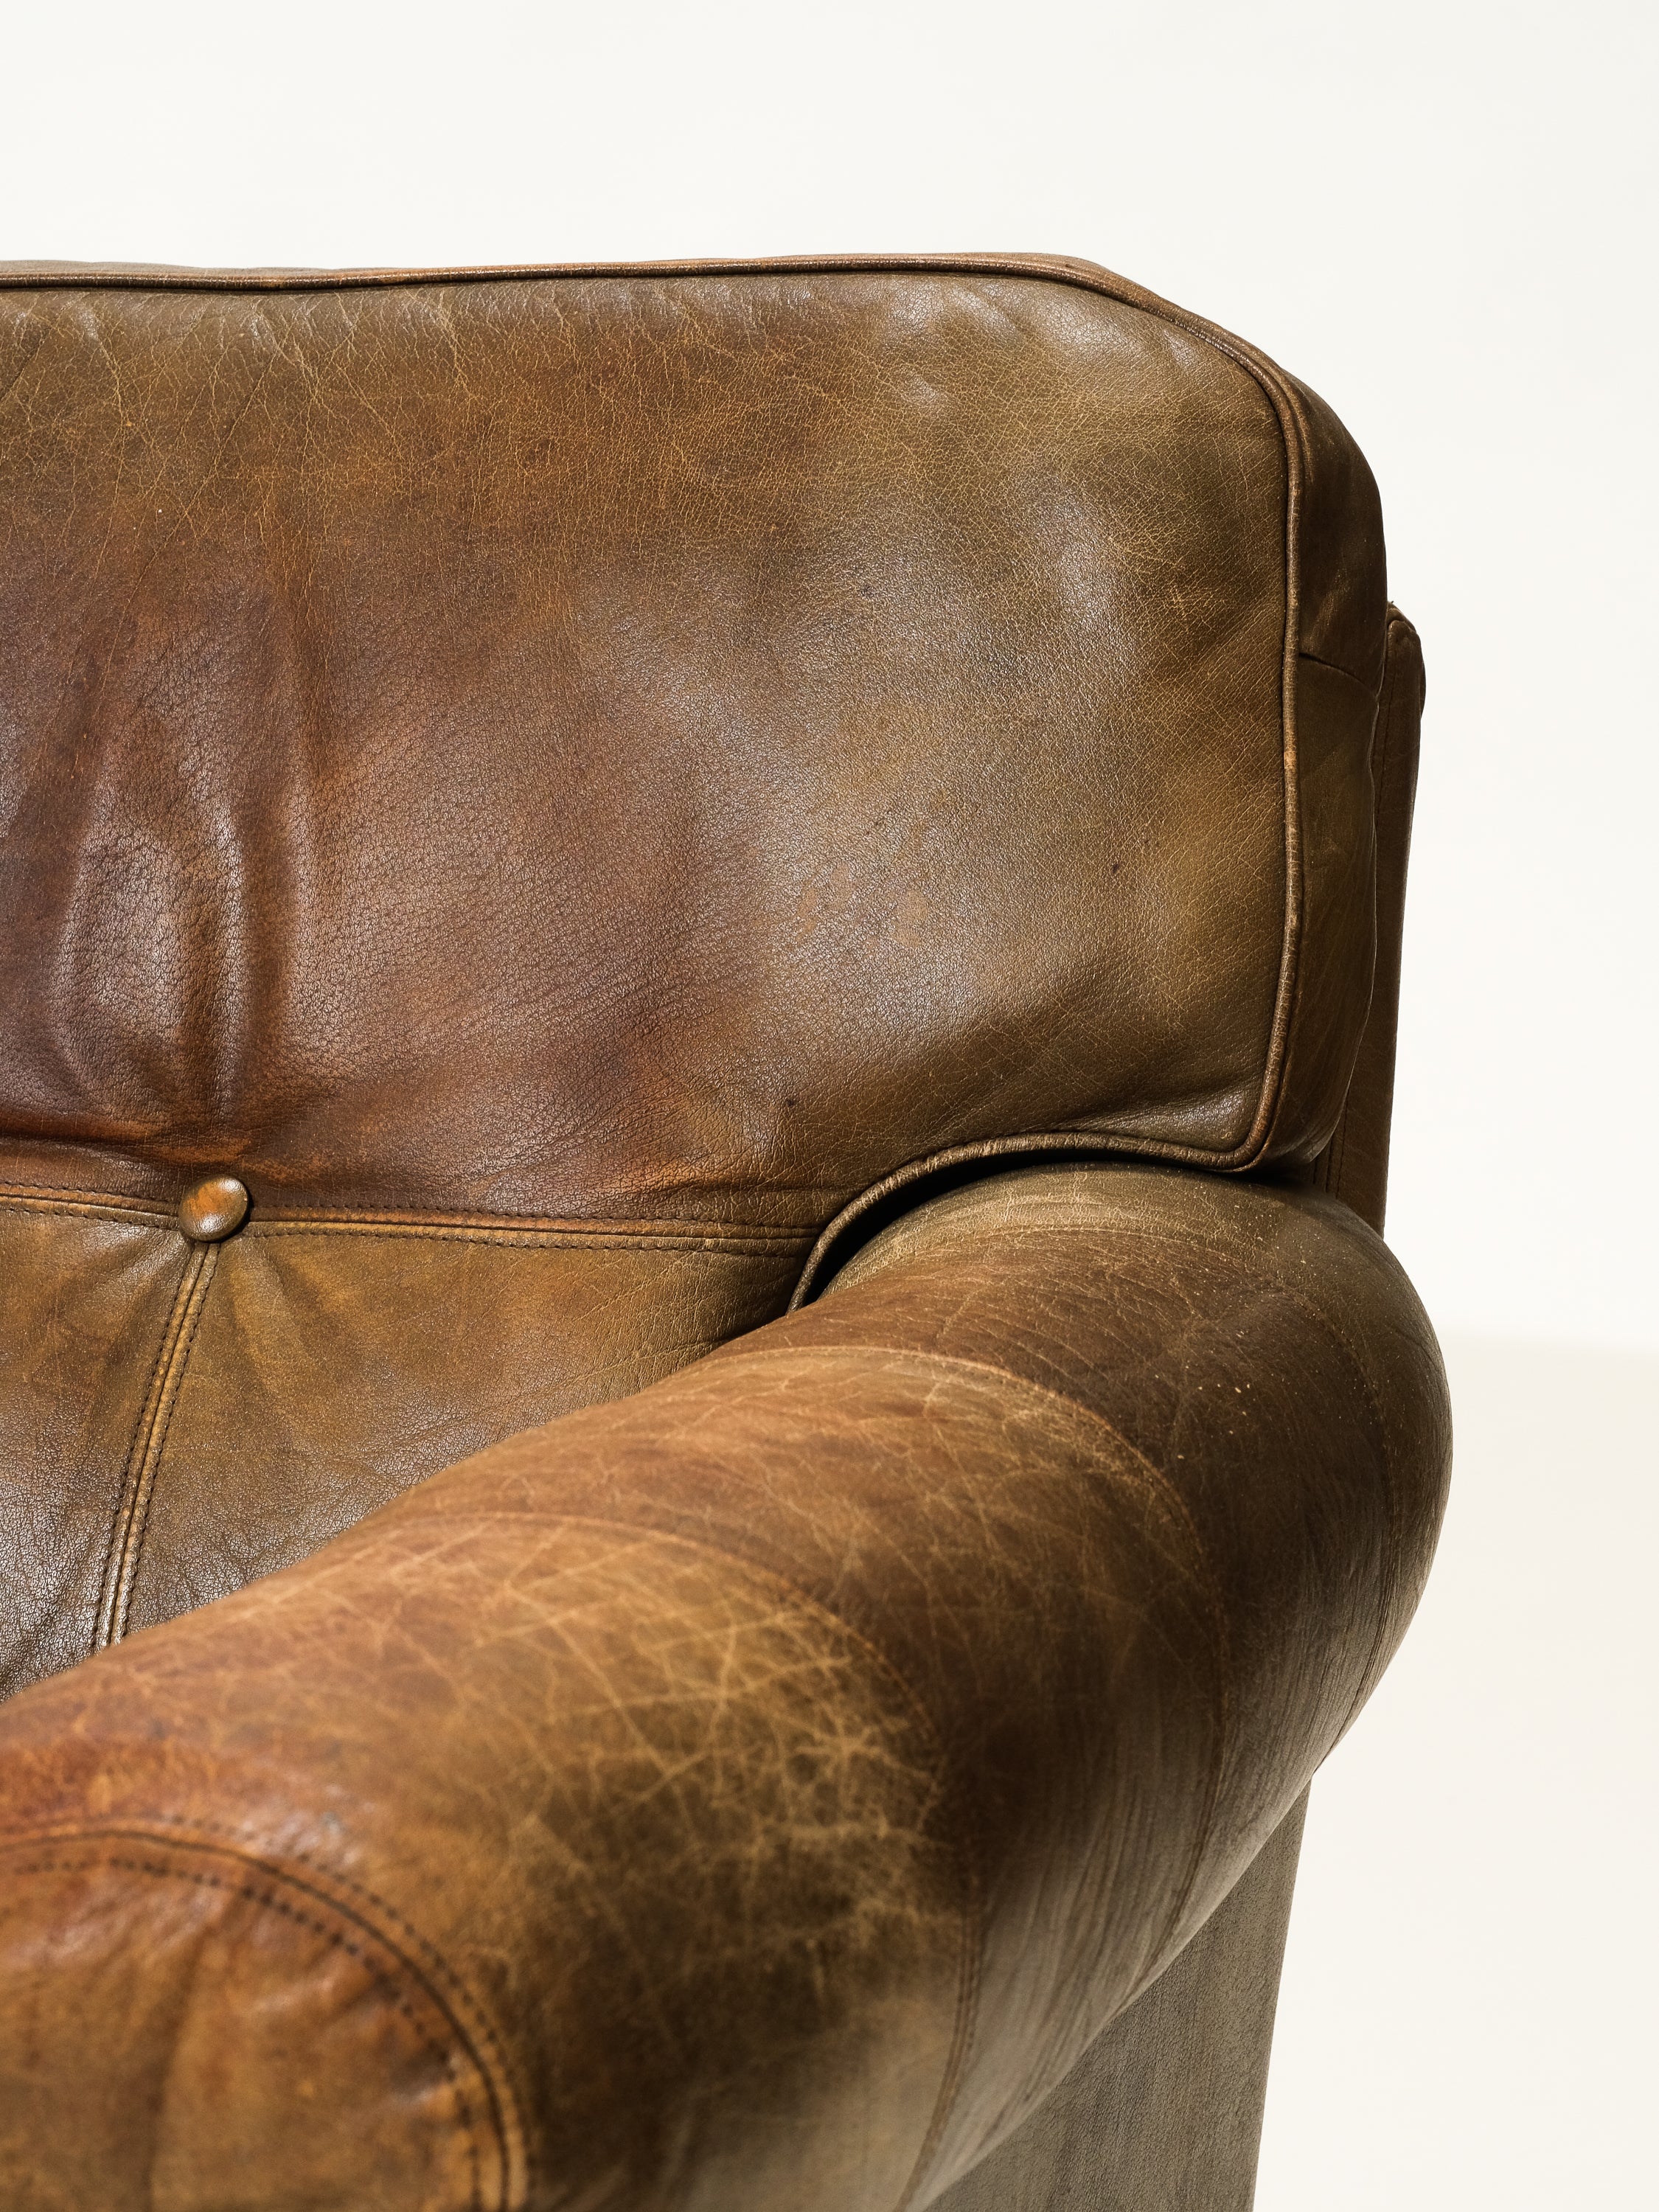 Swedish Leather Lounge Chair from OPE, 1960s